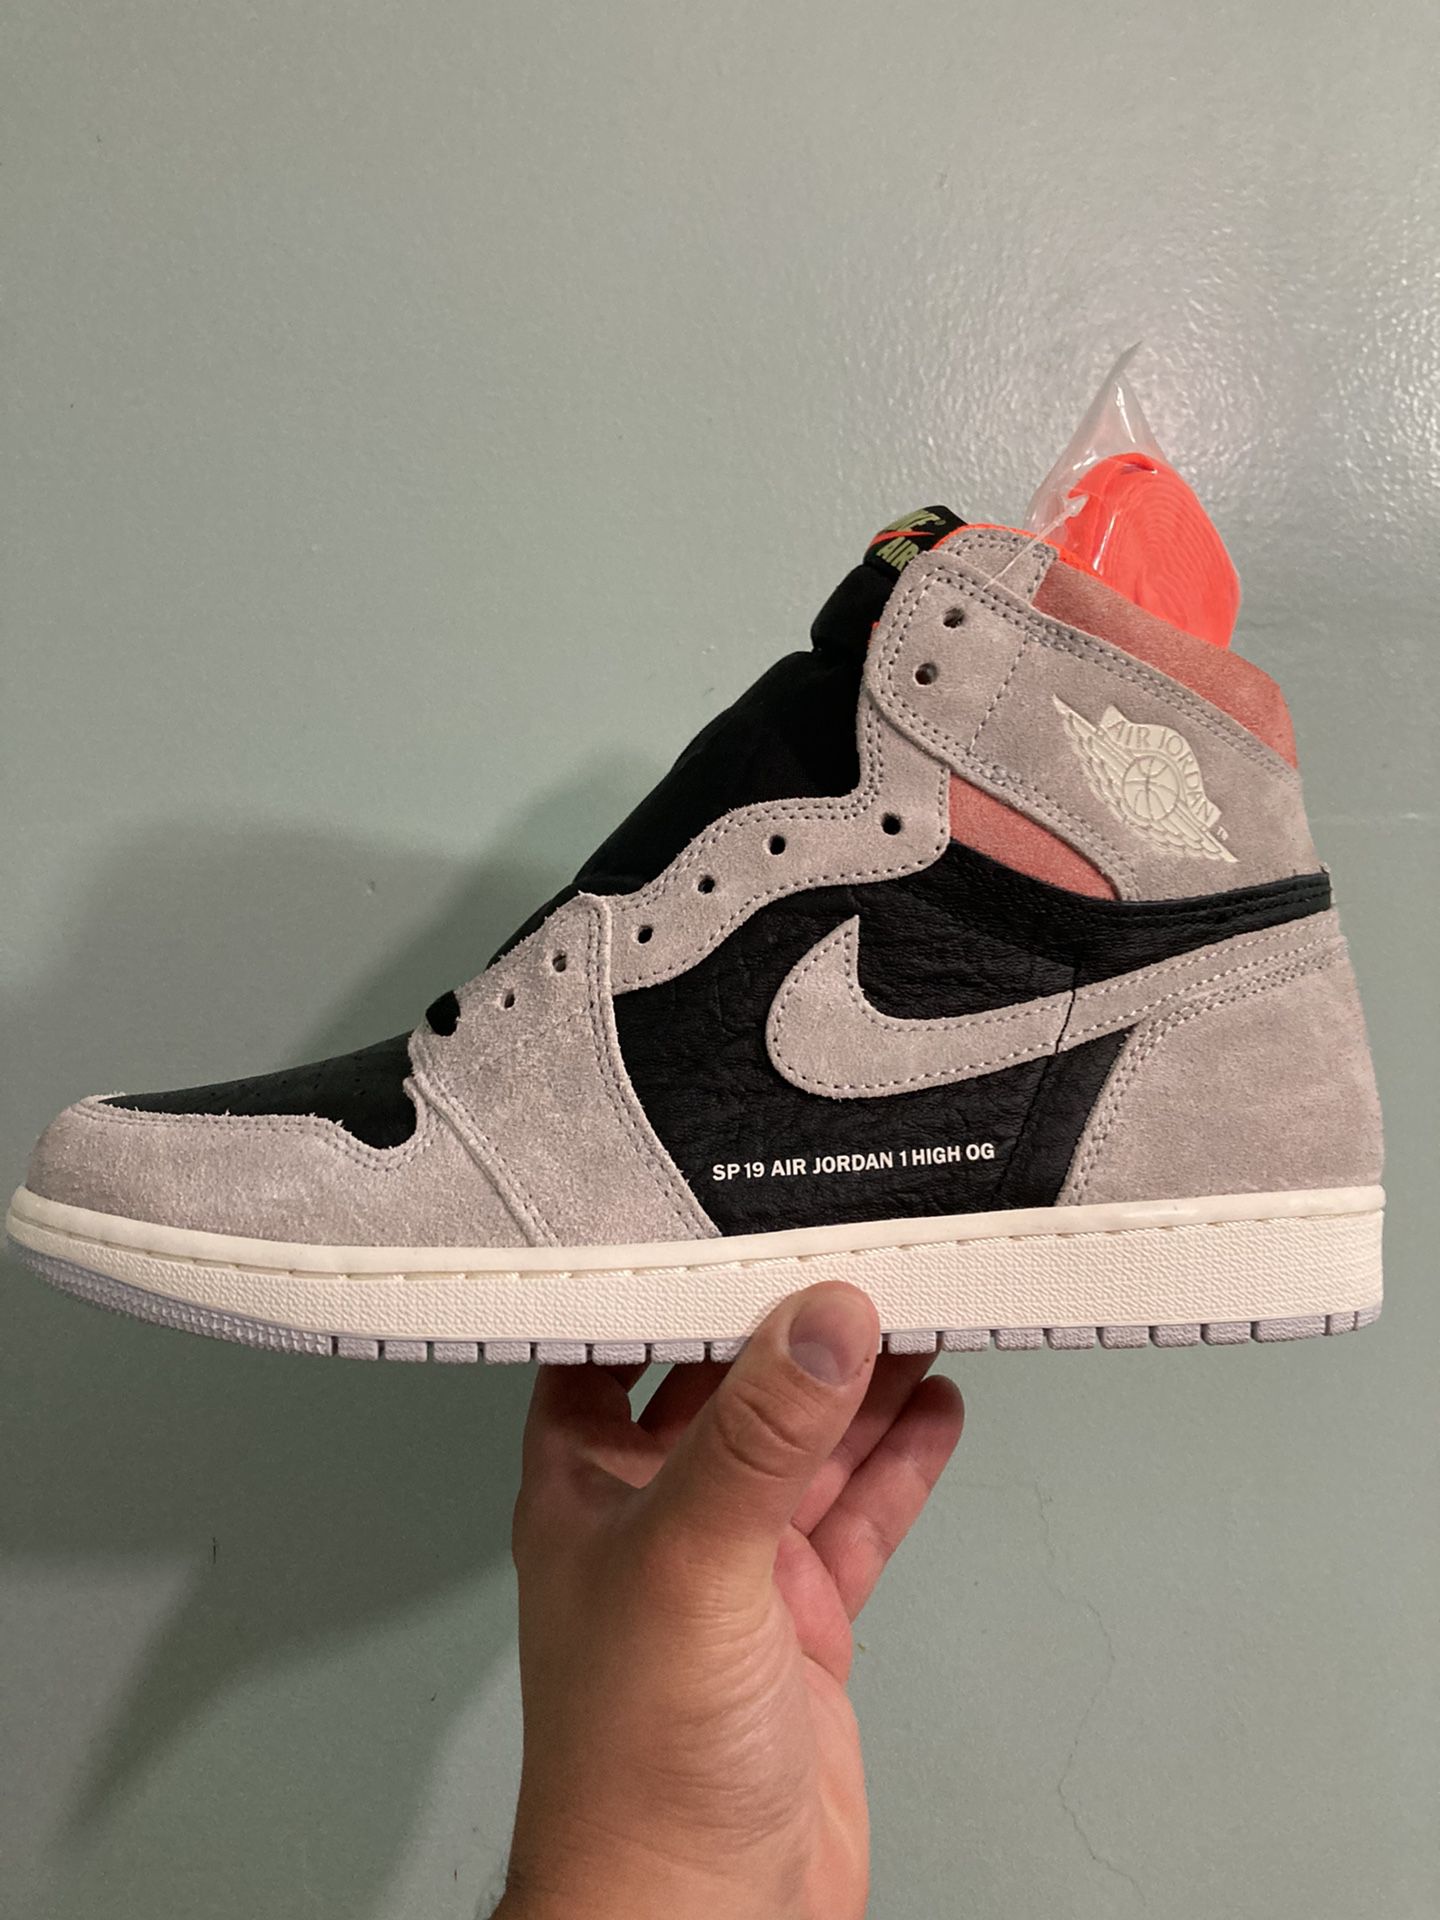 Jordan 1 high “Hyper Crimsion” size (11). In men’s. DS(New) factory laced. $325 takes today! No trades cash only! Picked up locally in Providence.